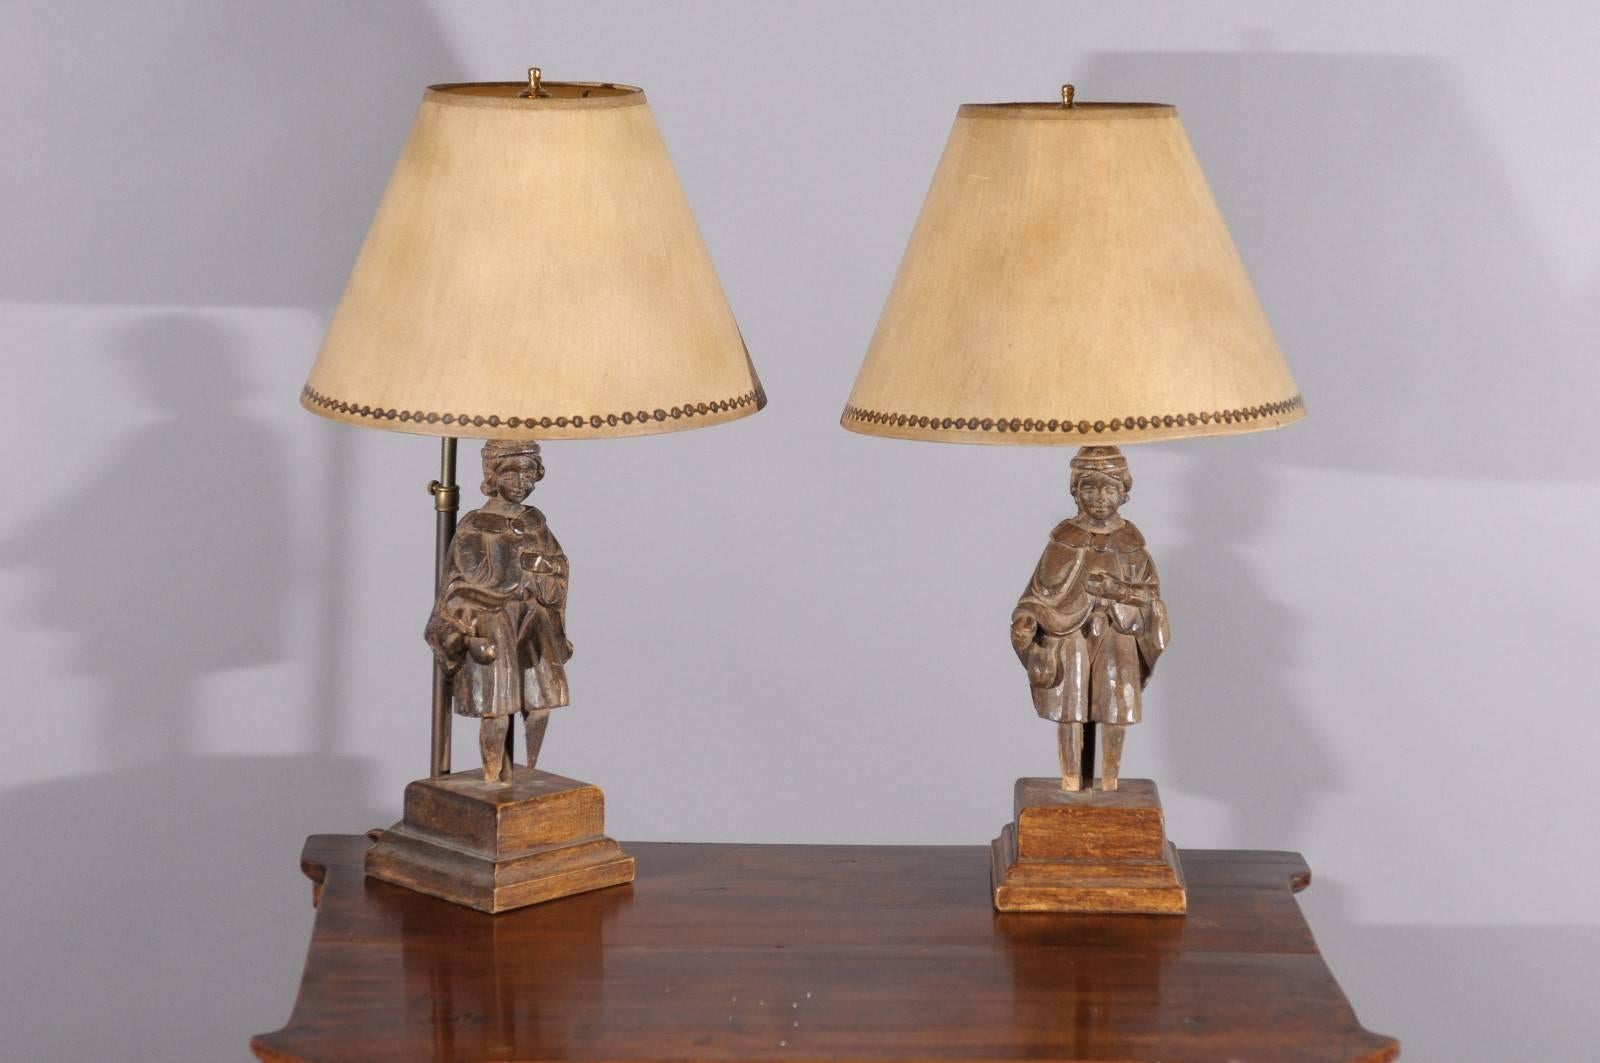 Pair of carved oak 19th century figural fragments mounted as table lamps with shades.